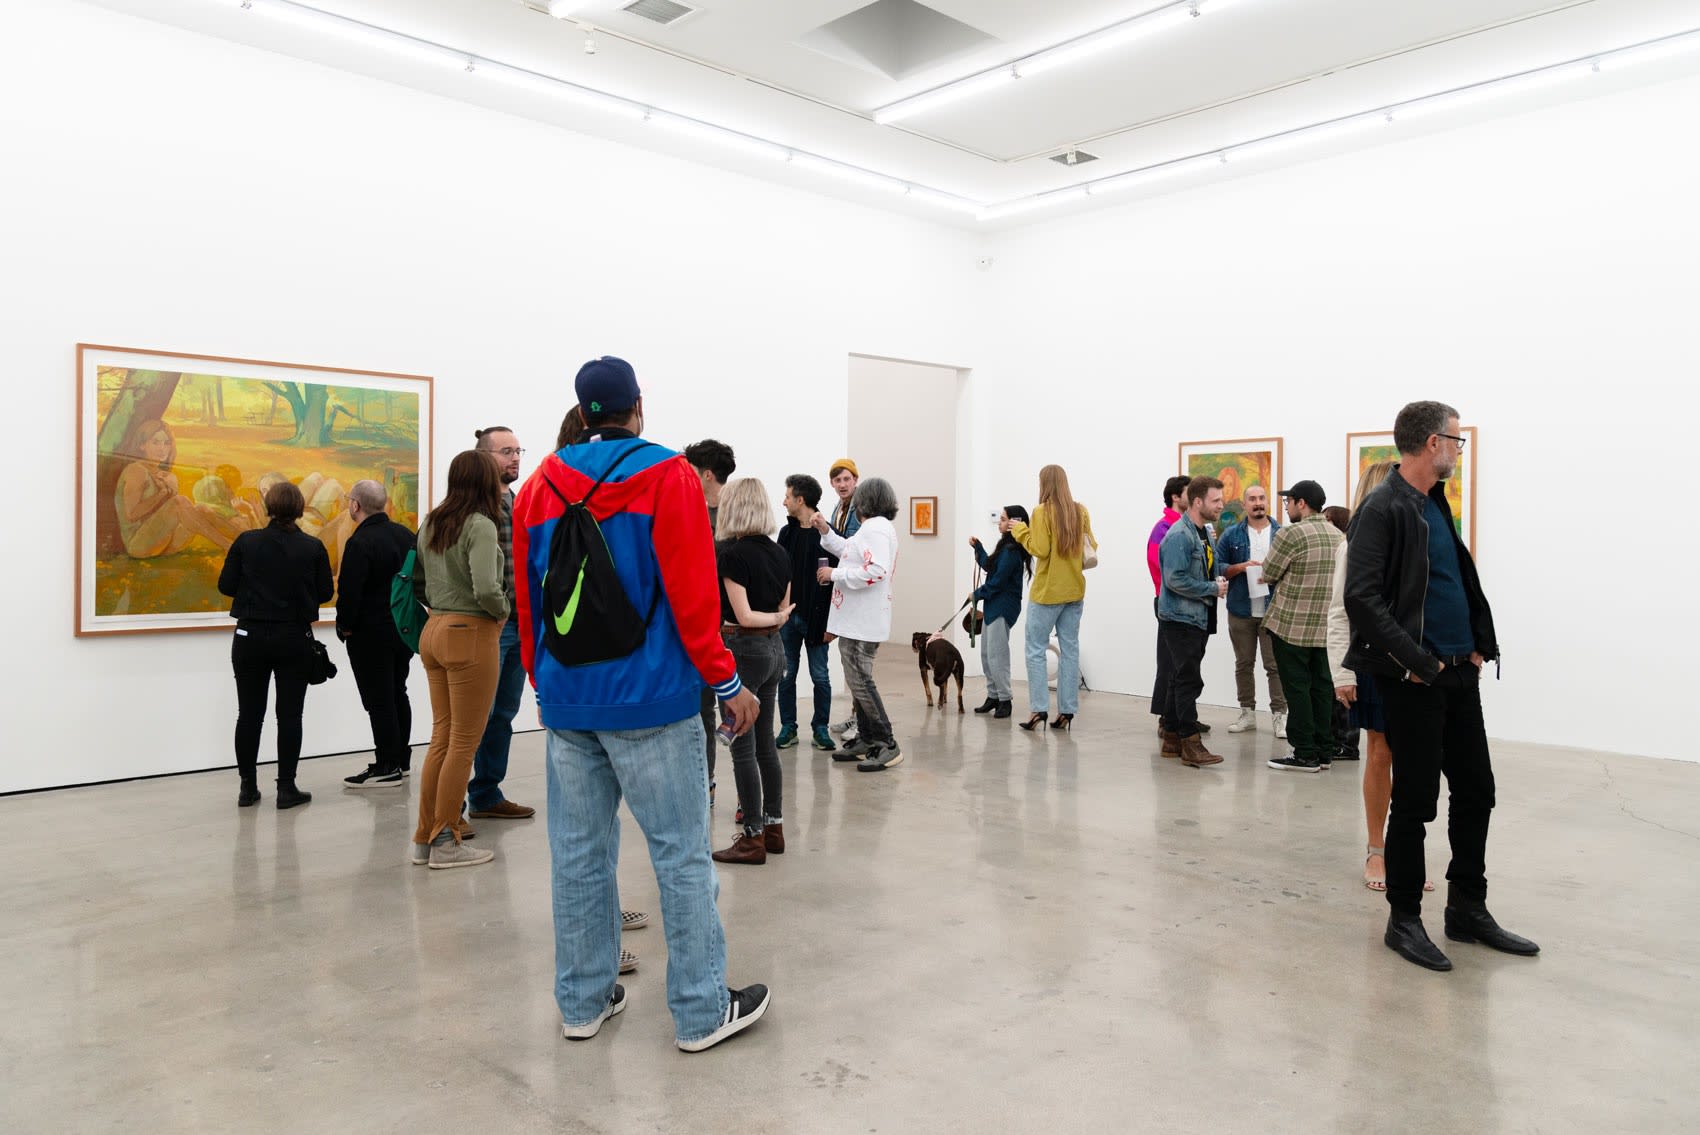 A crowd of about thirty young people gathers inside a white wall art gallery with skylights for the opening reception of Rachel Gregor's painting exhibition, Still Summer.